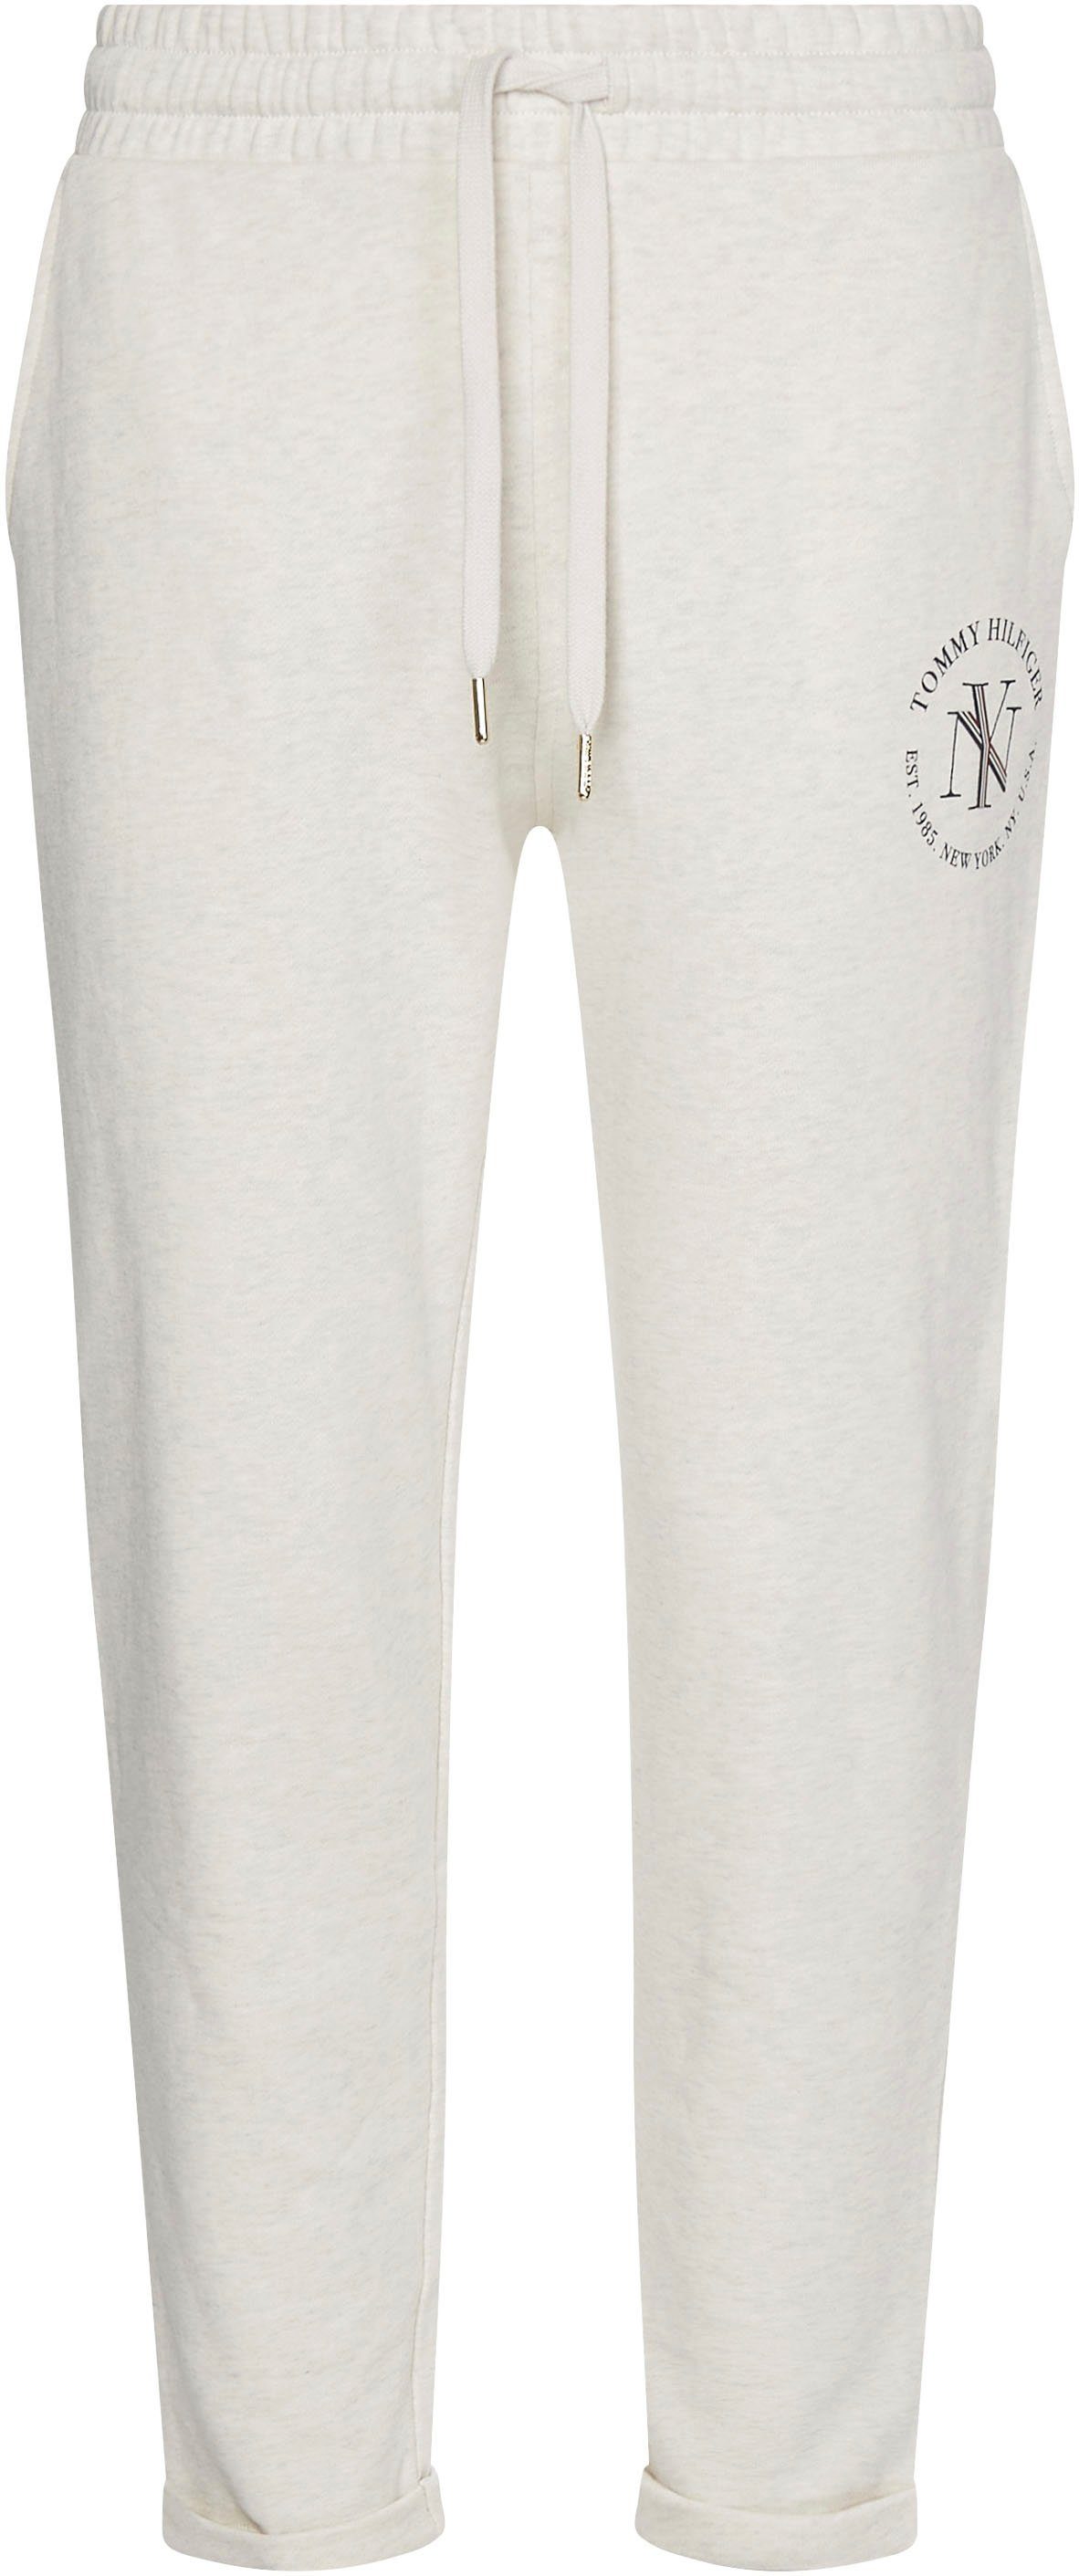 Hilfiger Markenlabel Tommy Tommy ROUNDALL White-Heather Sweatpants NYC TAPERED mit SWEATPANTS Hilfiger